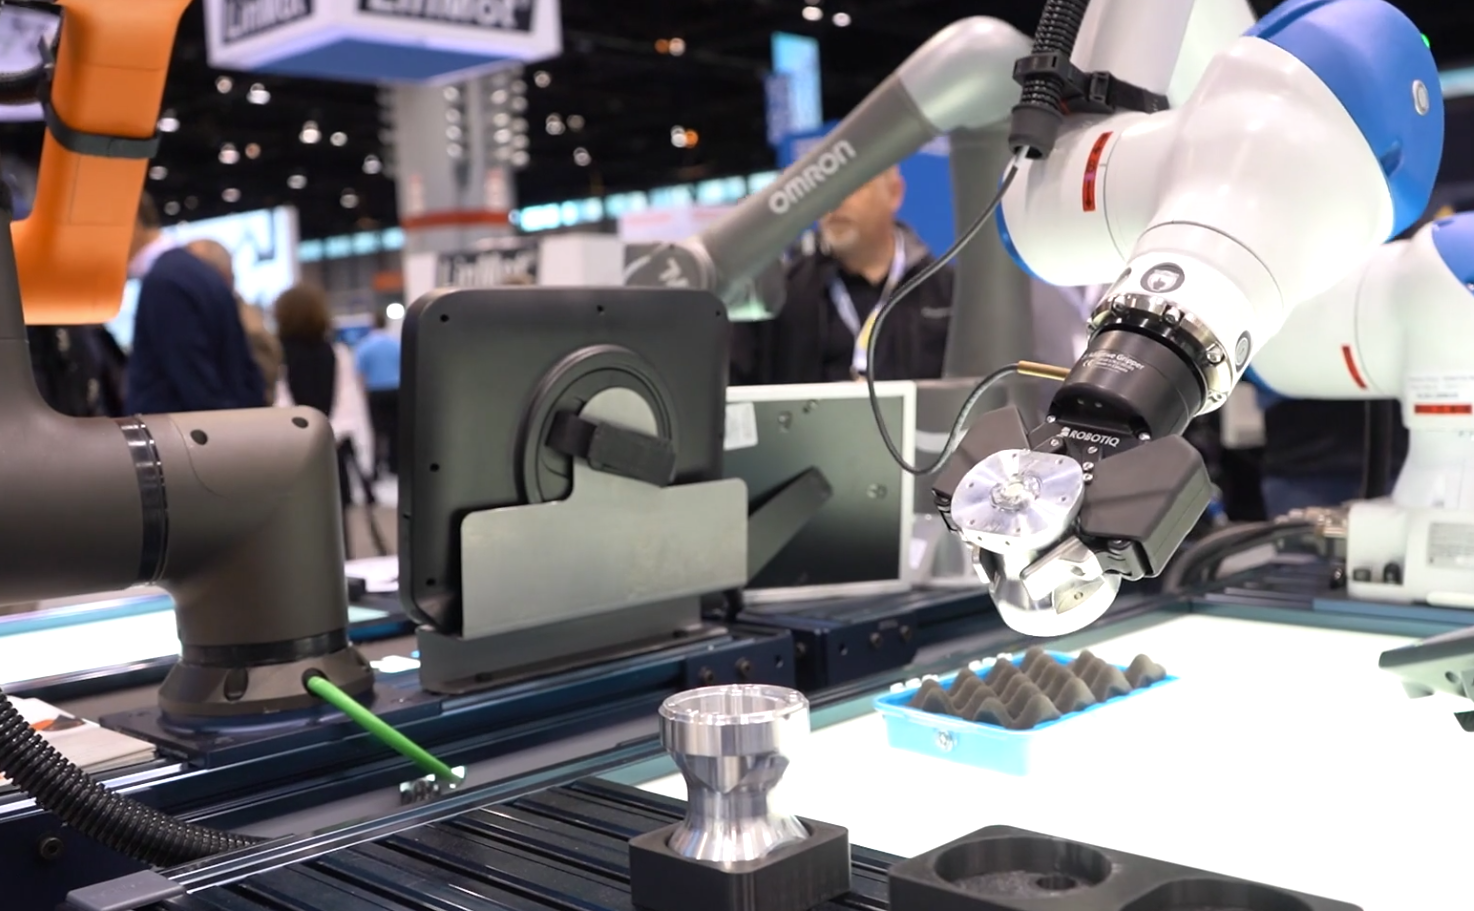 5 Robotics Trends for 2020 and What They Mean for You